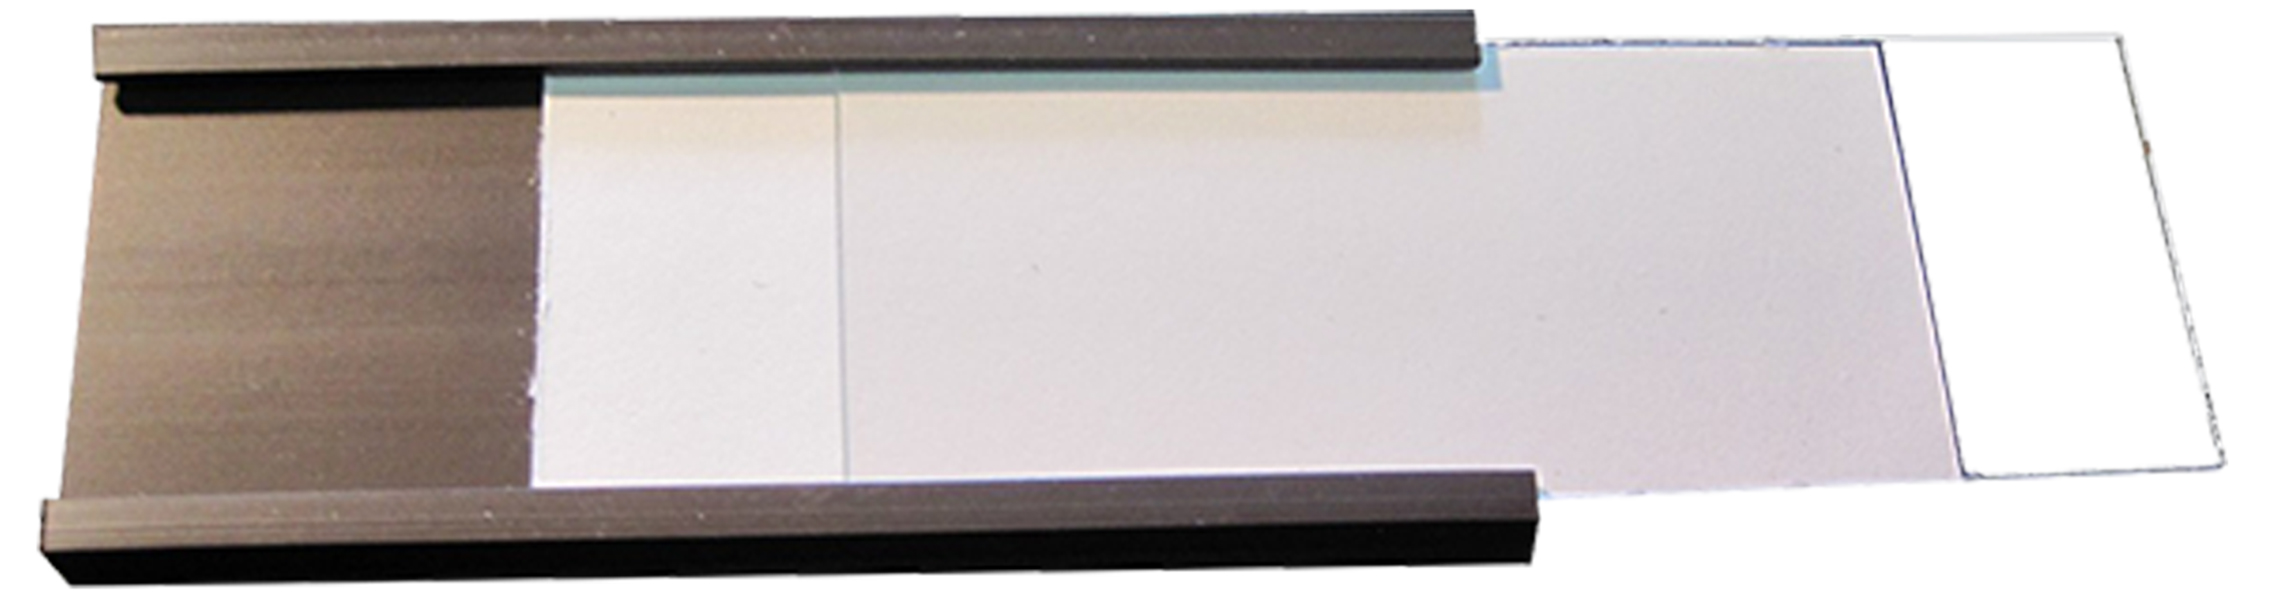 C-Channel Magnets / ’C’ Profile Magnetic Label Holders